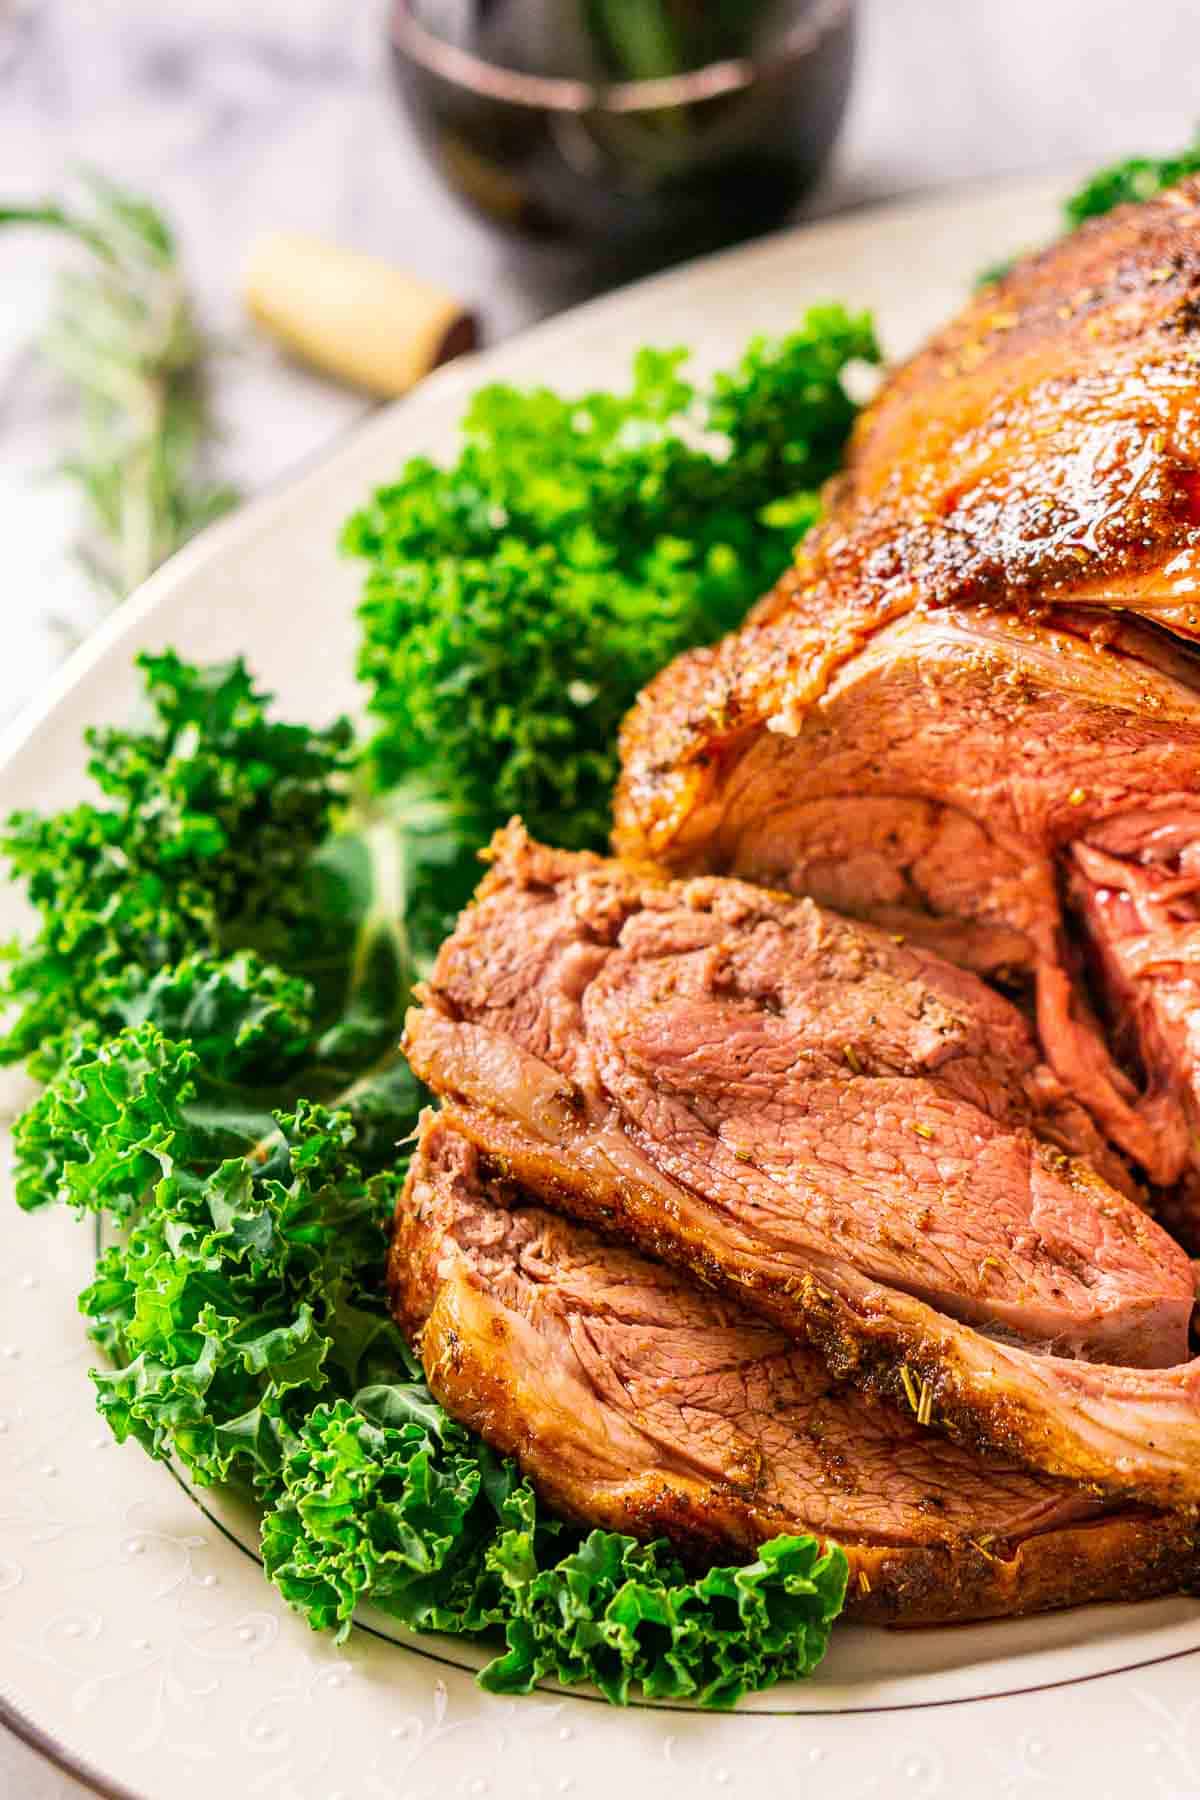 A close-up view of slices of the smoked leg of lamb on a white platter with decorative green lettuce.